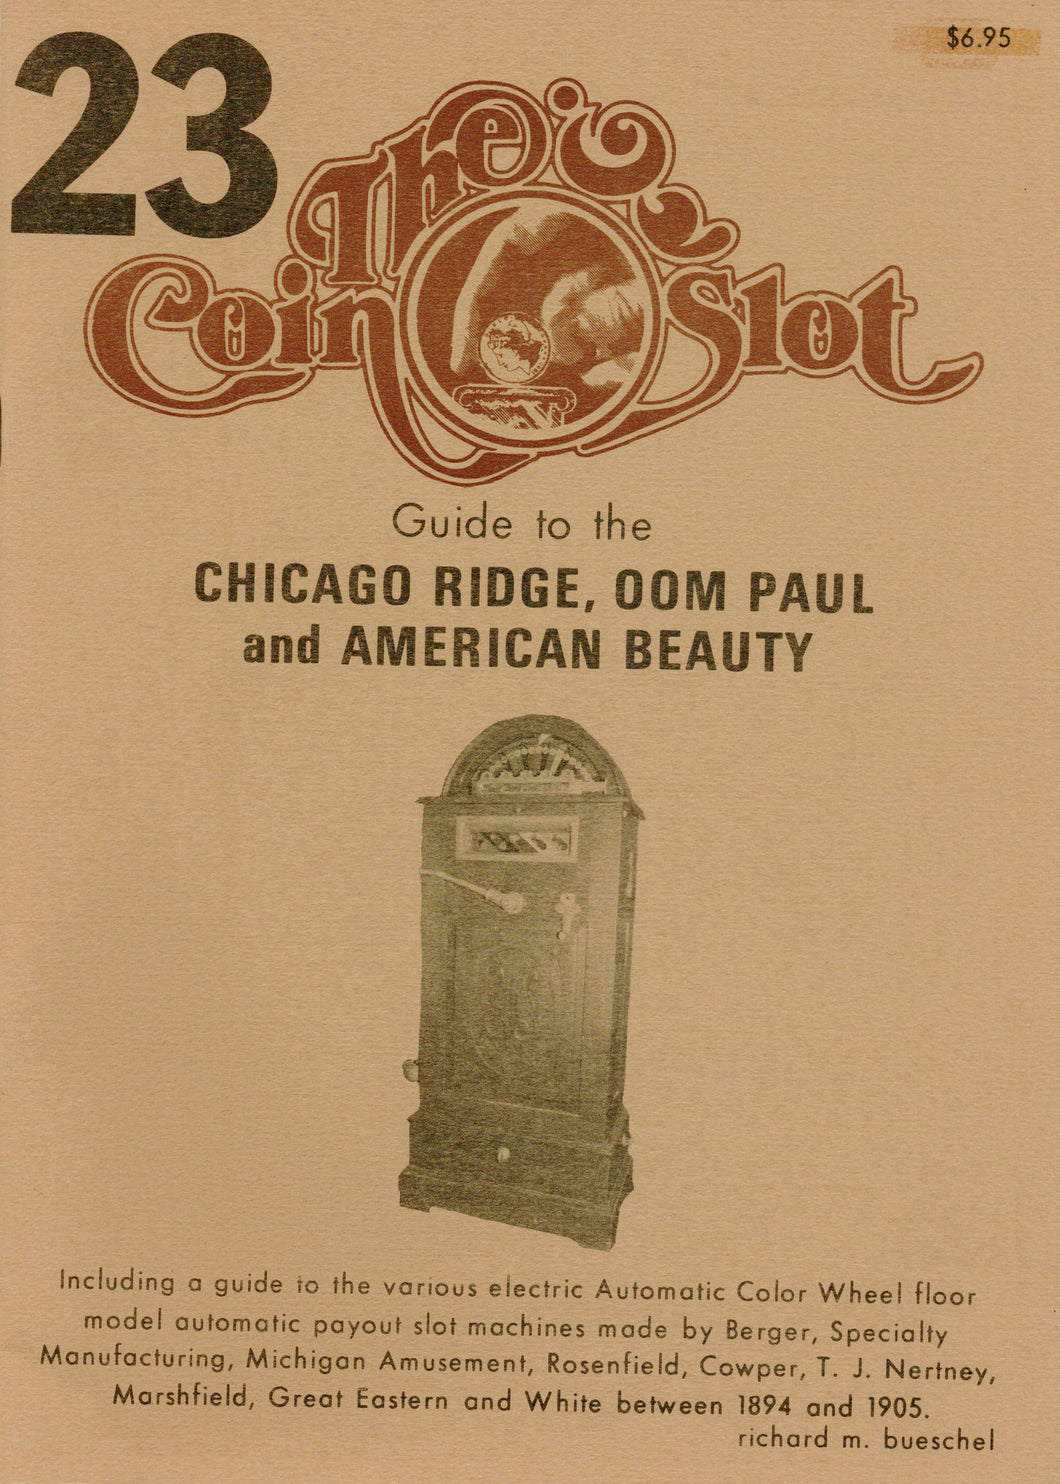 Coin Slot #23. Guide to the Chicago Ridge, Oom Paul and American Beauty